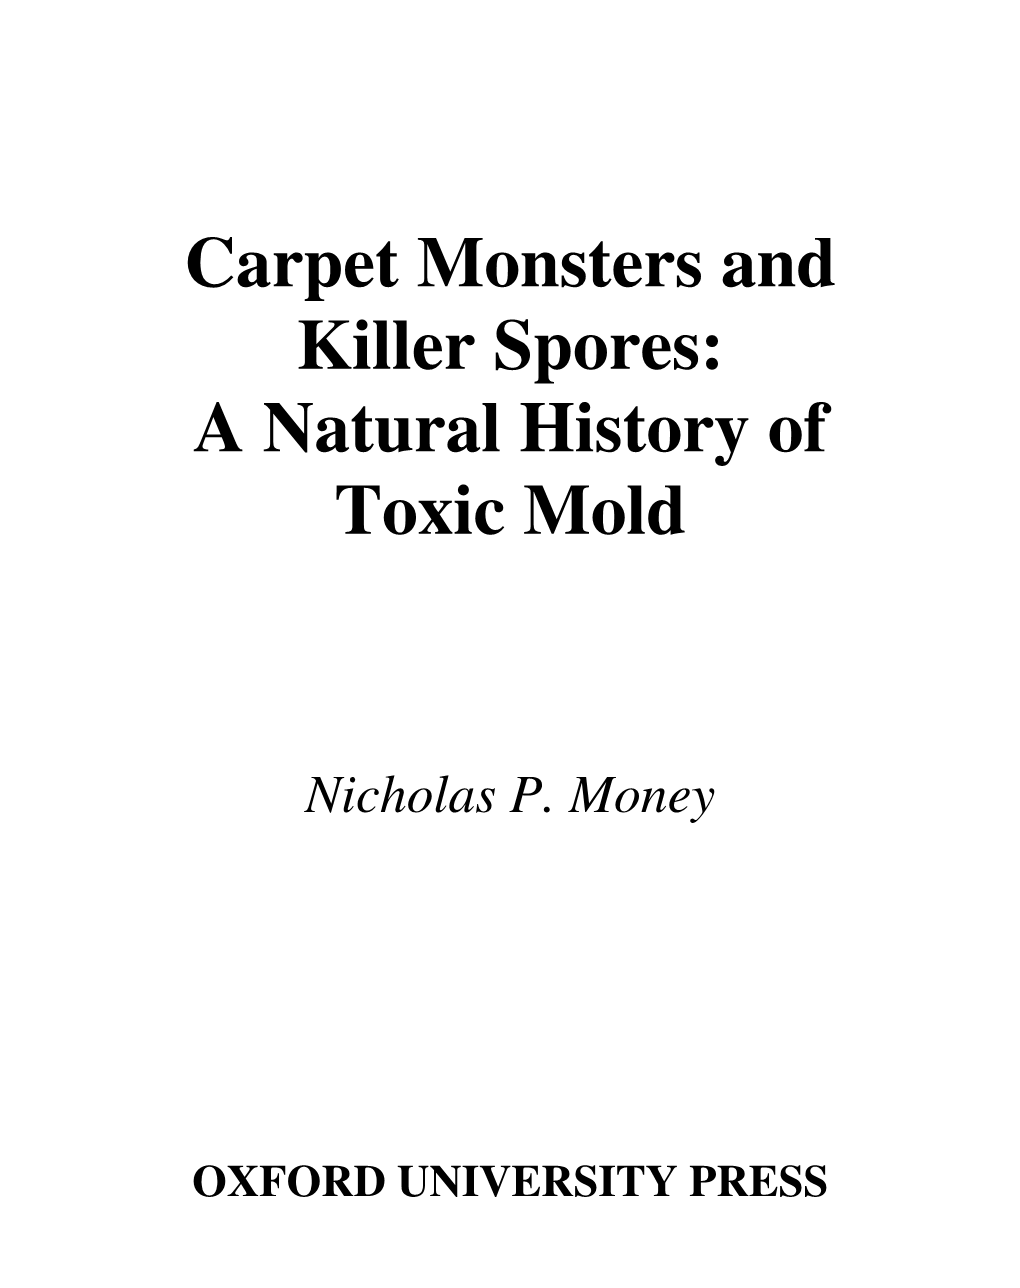 Carpet Monsters and Killer Spores: a Natural History of Toxic Mold